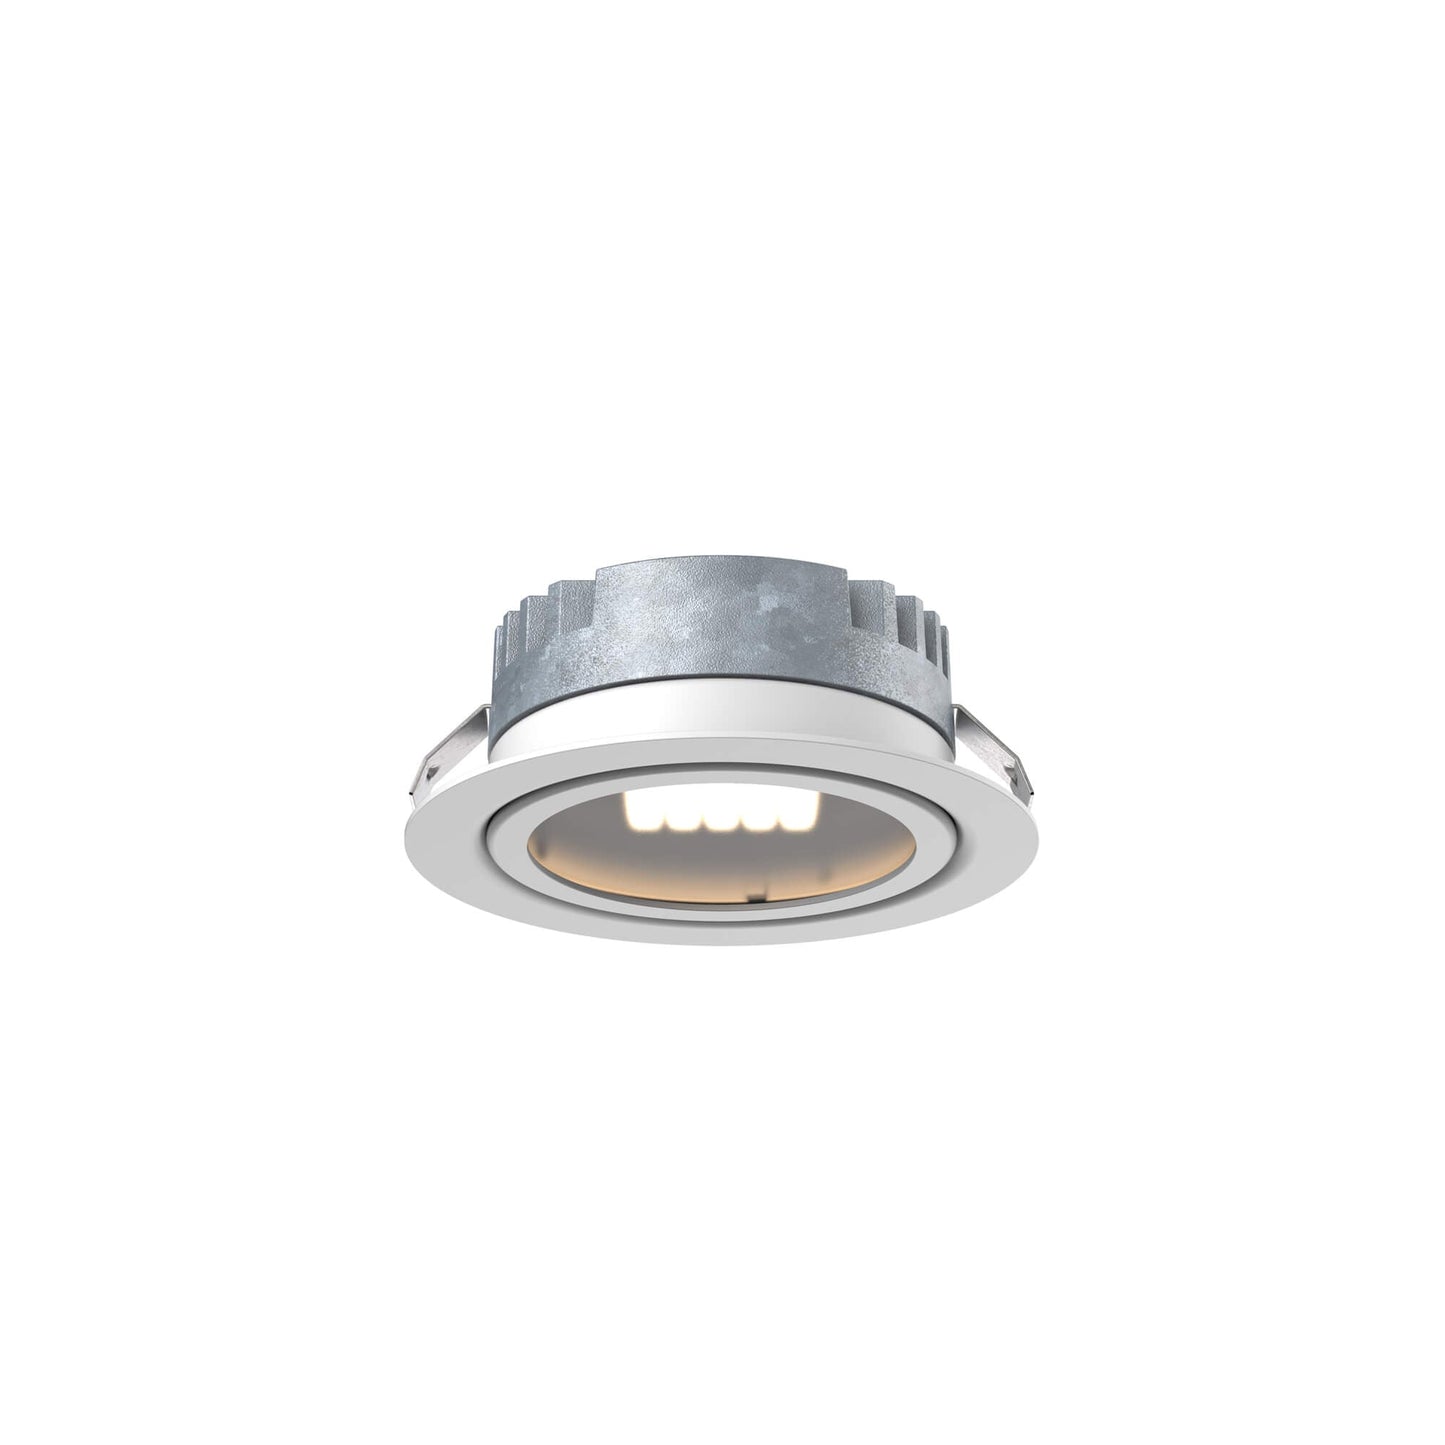 DALS-4005-CC-WHDals Lighting 4005-CC 2W 12V LED Puck Light Selectable CCT